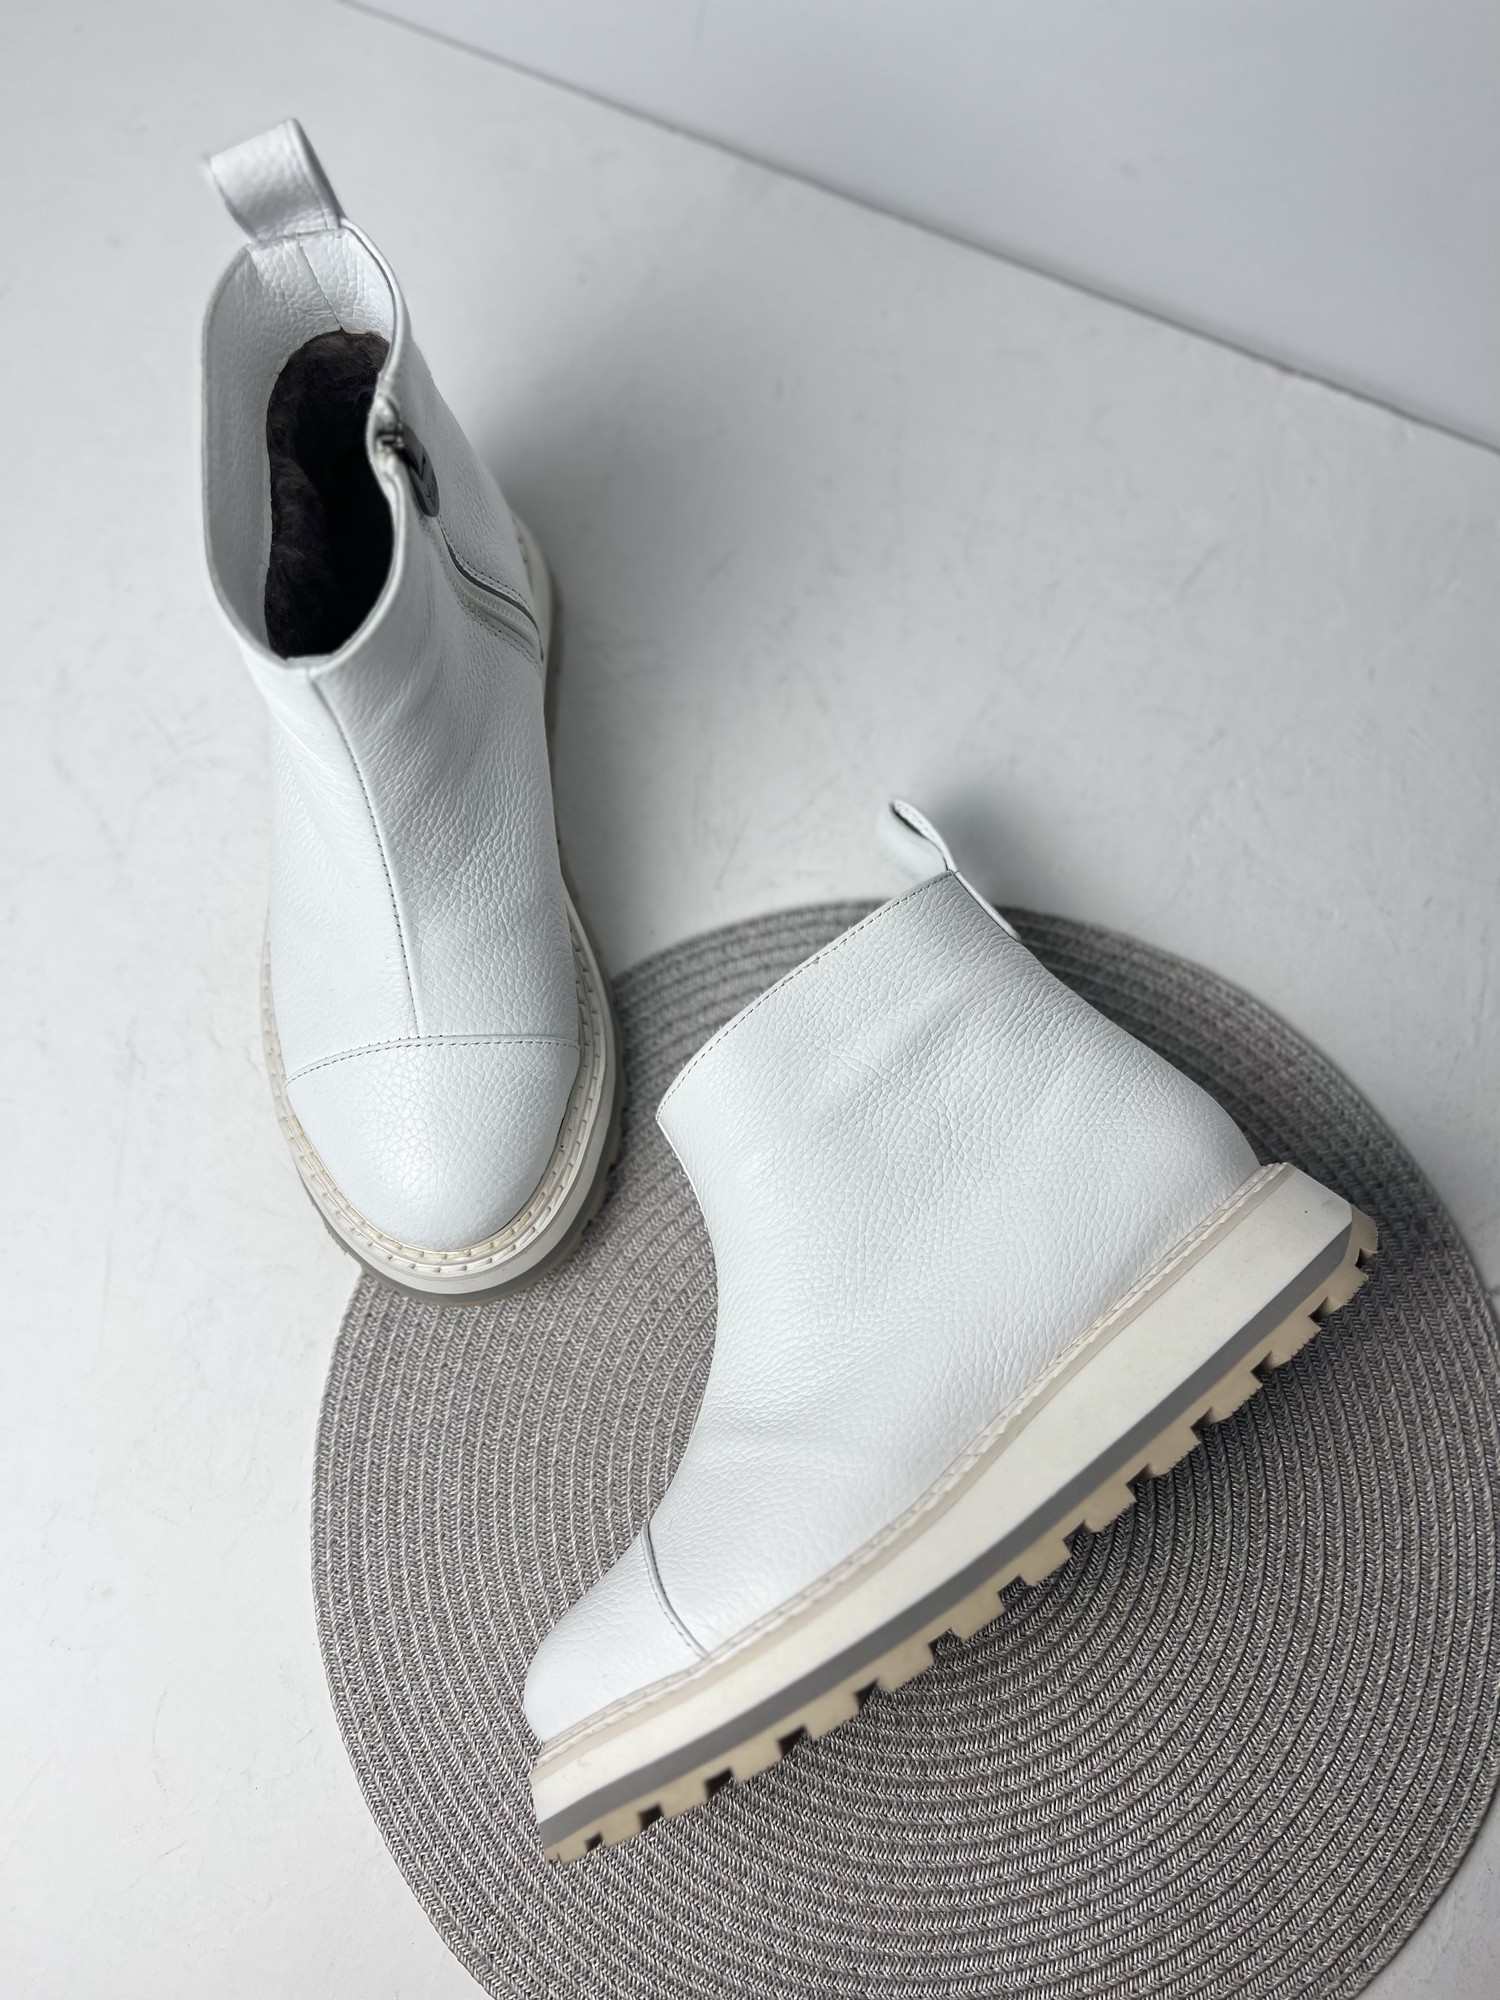 White leather boots